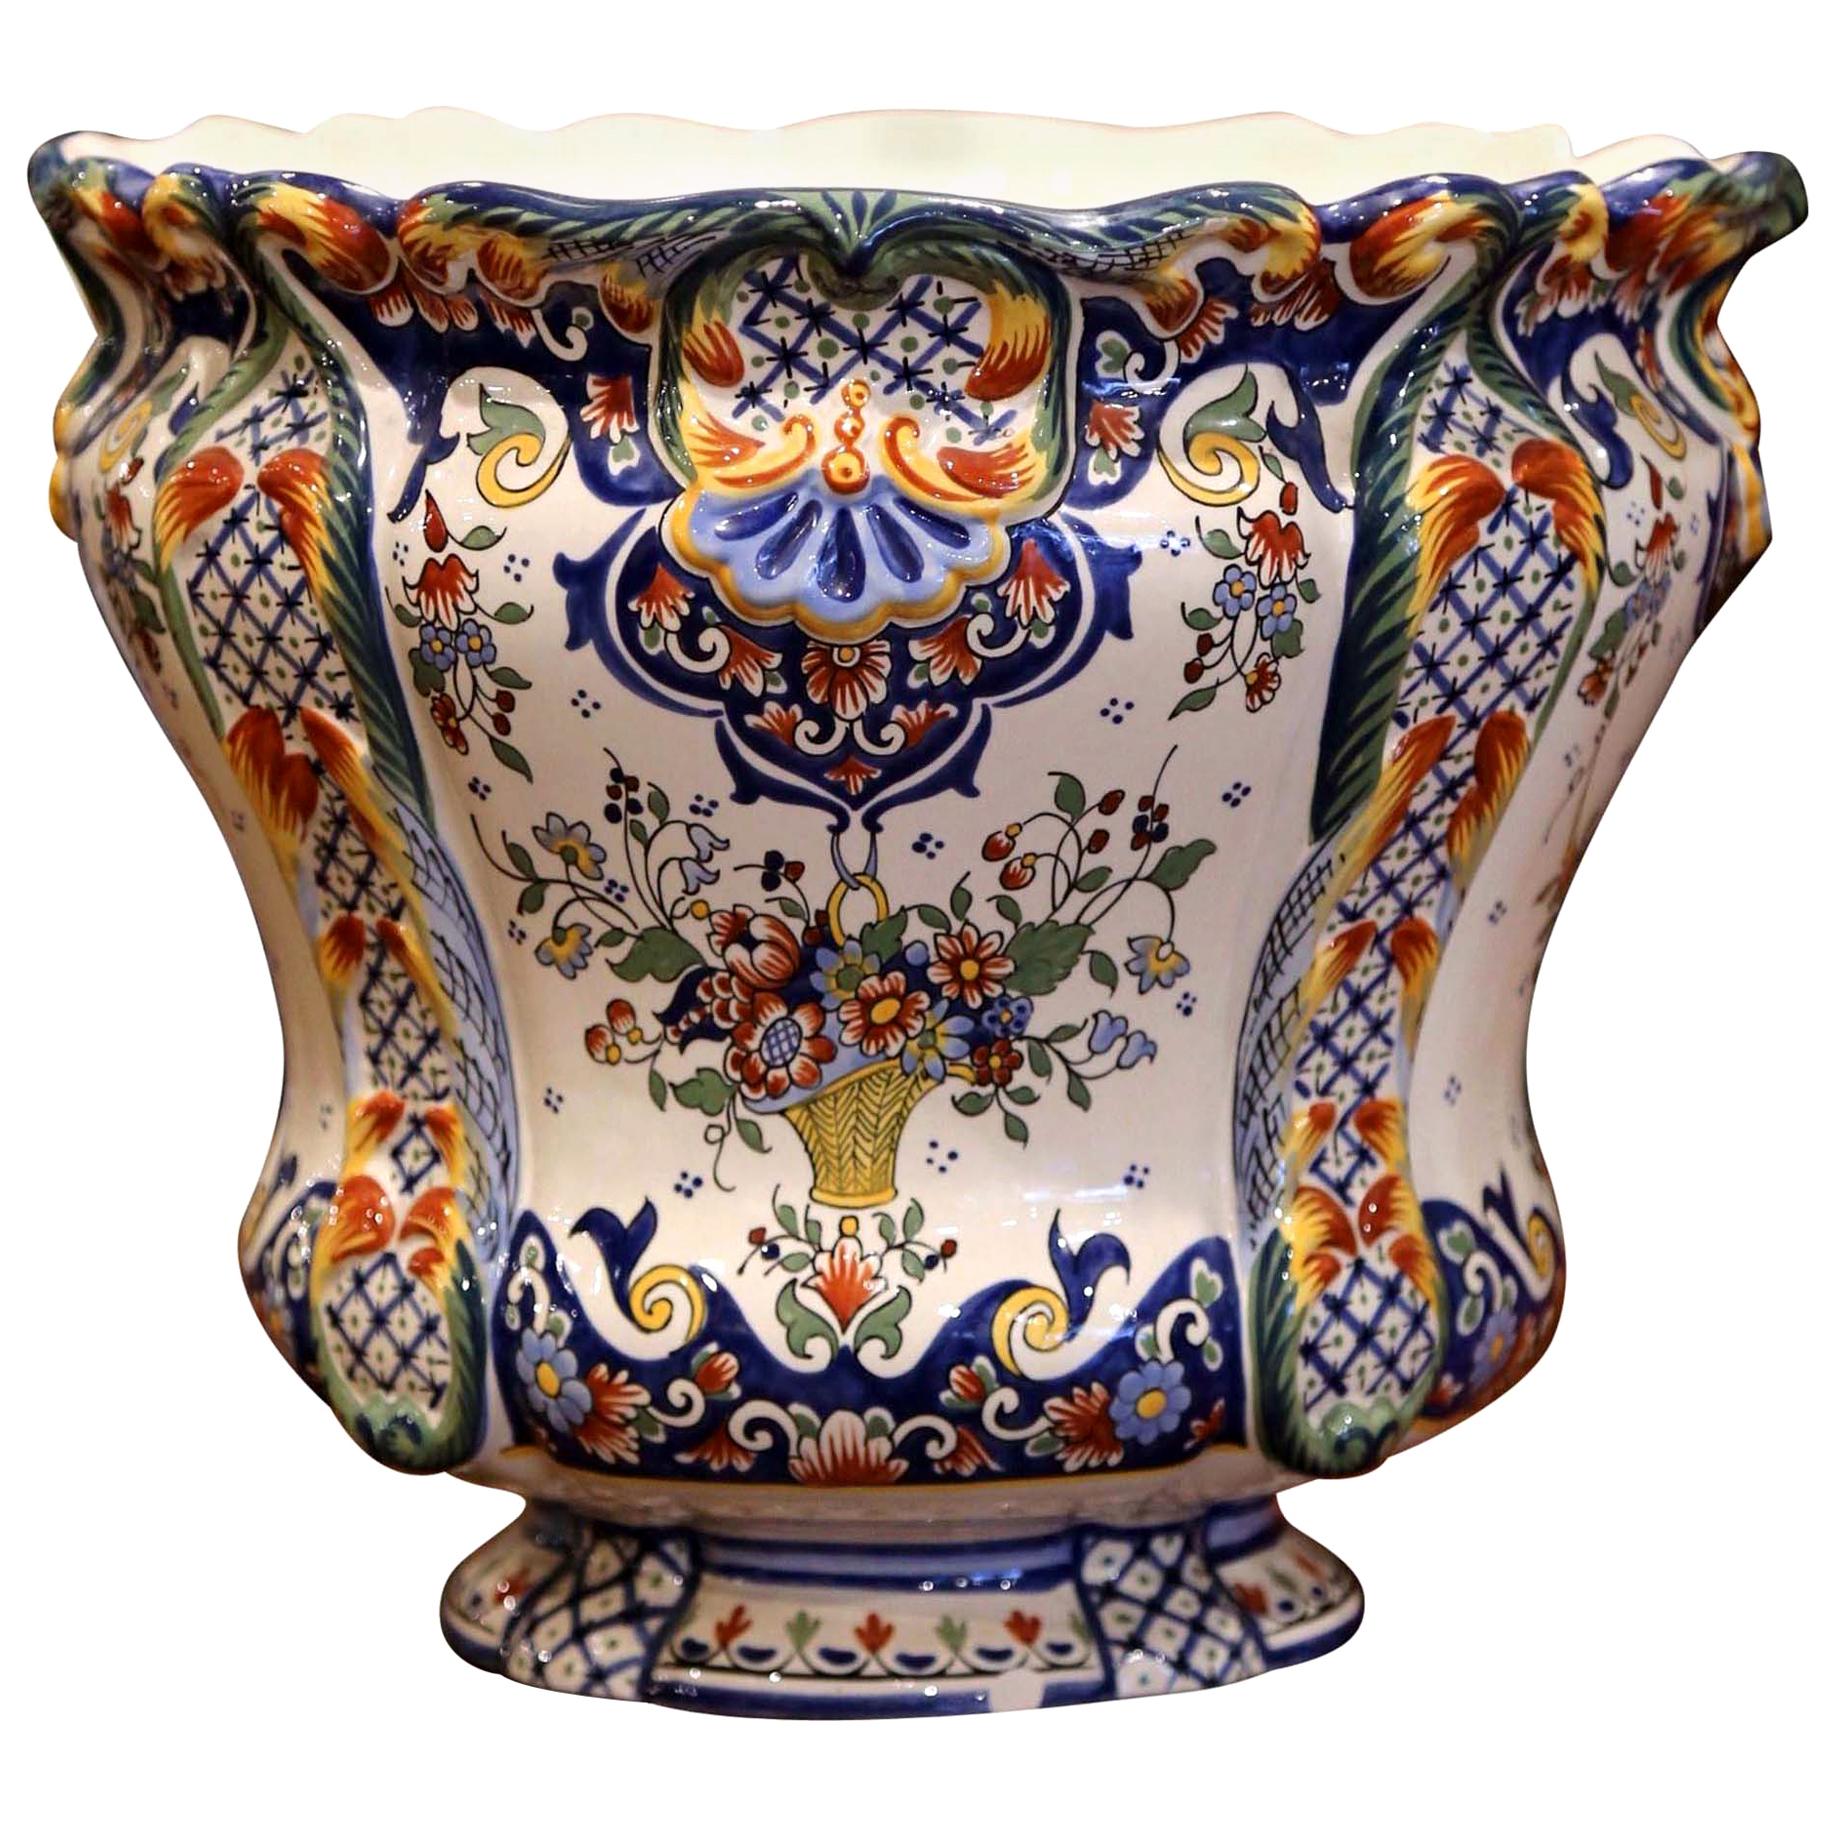 Early 20th Century, French Hand Painted Faience Planter from Normandy